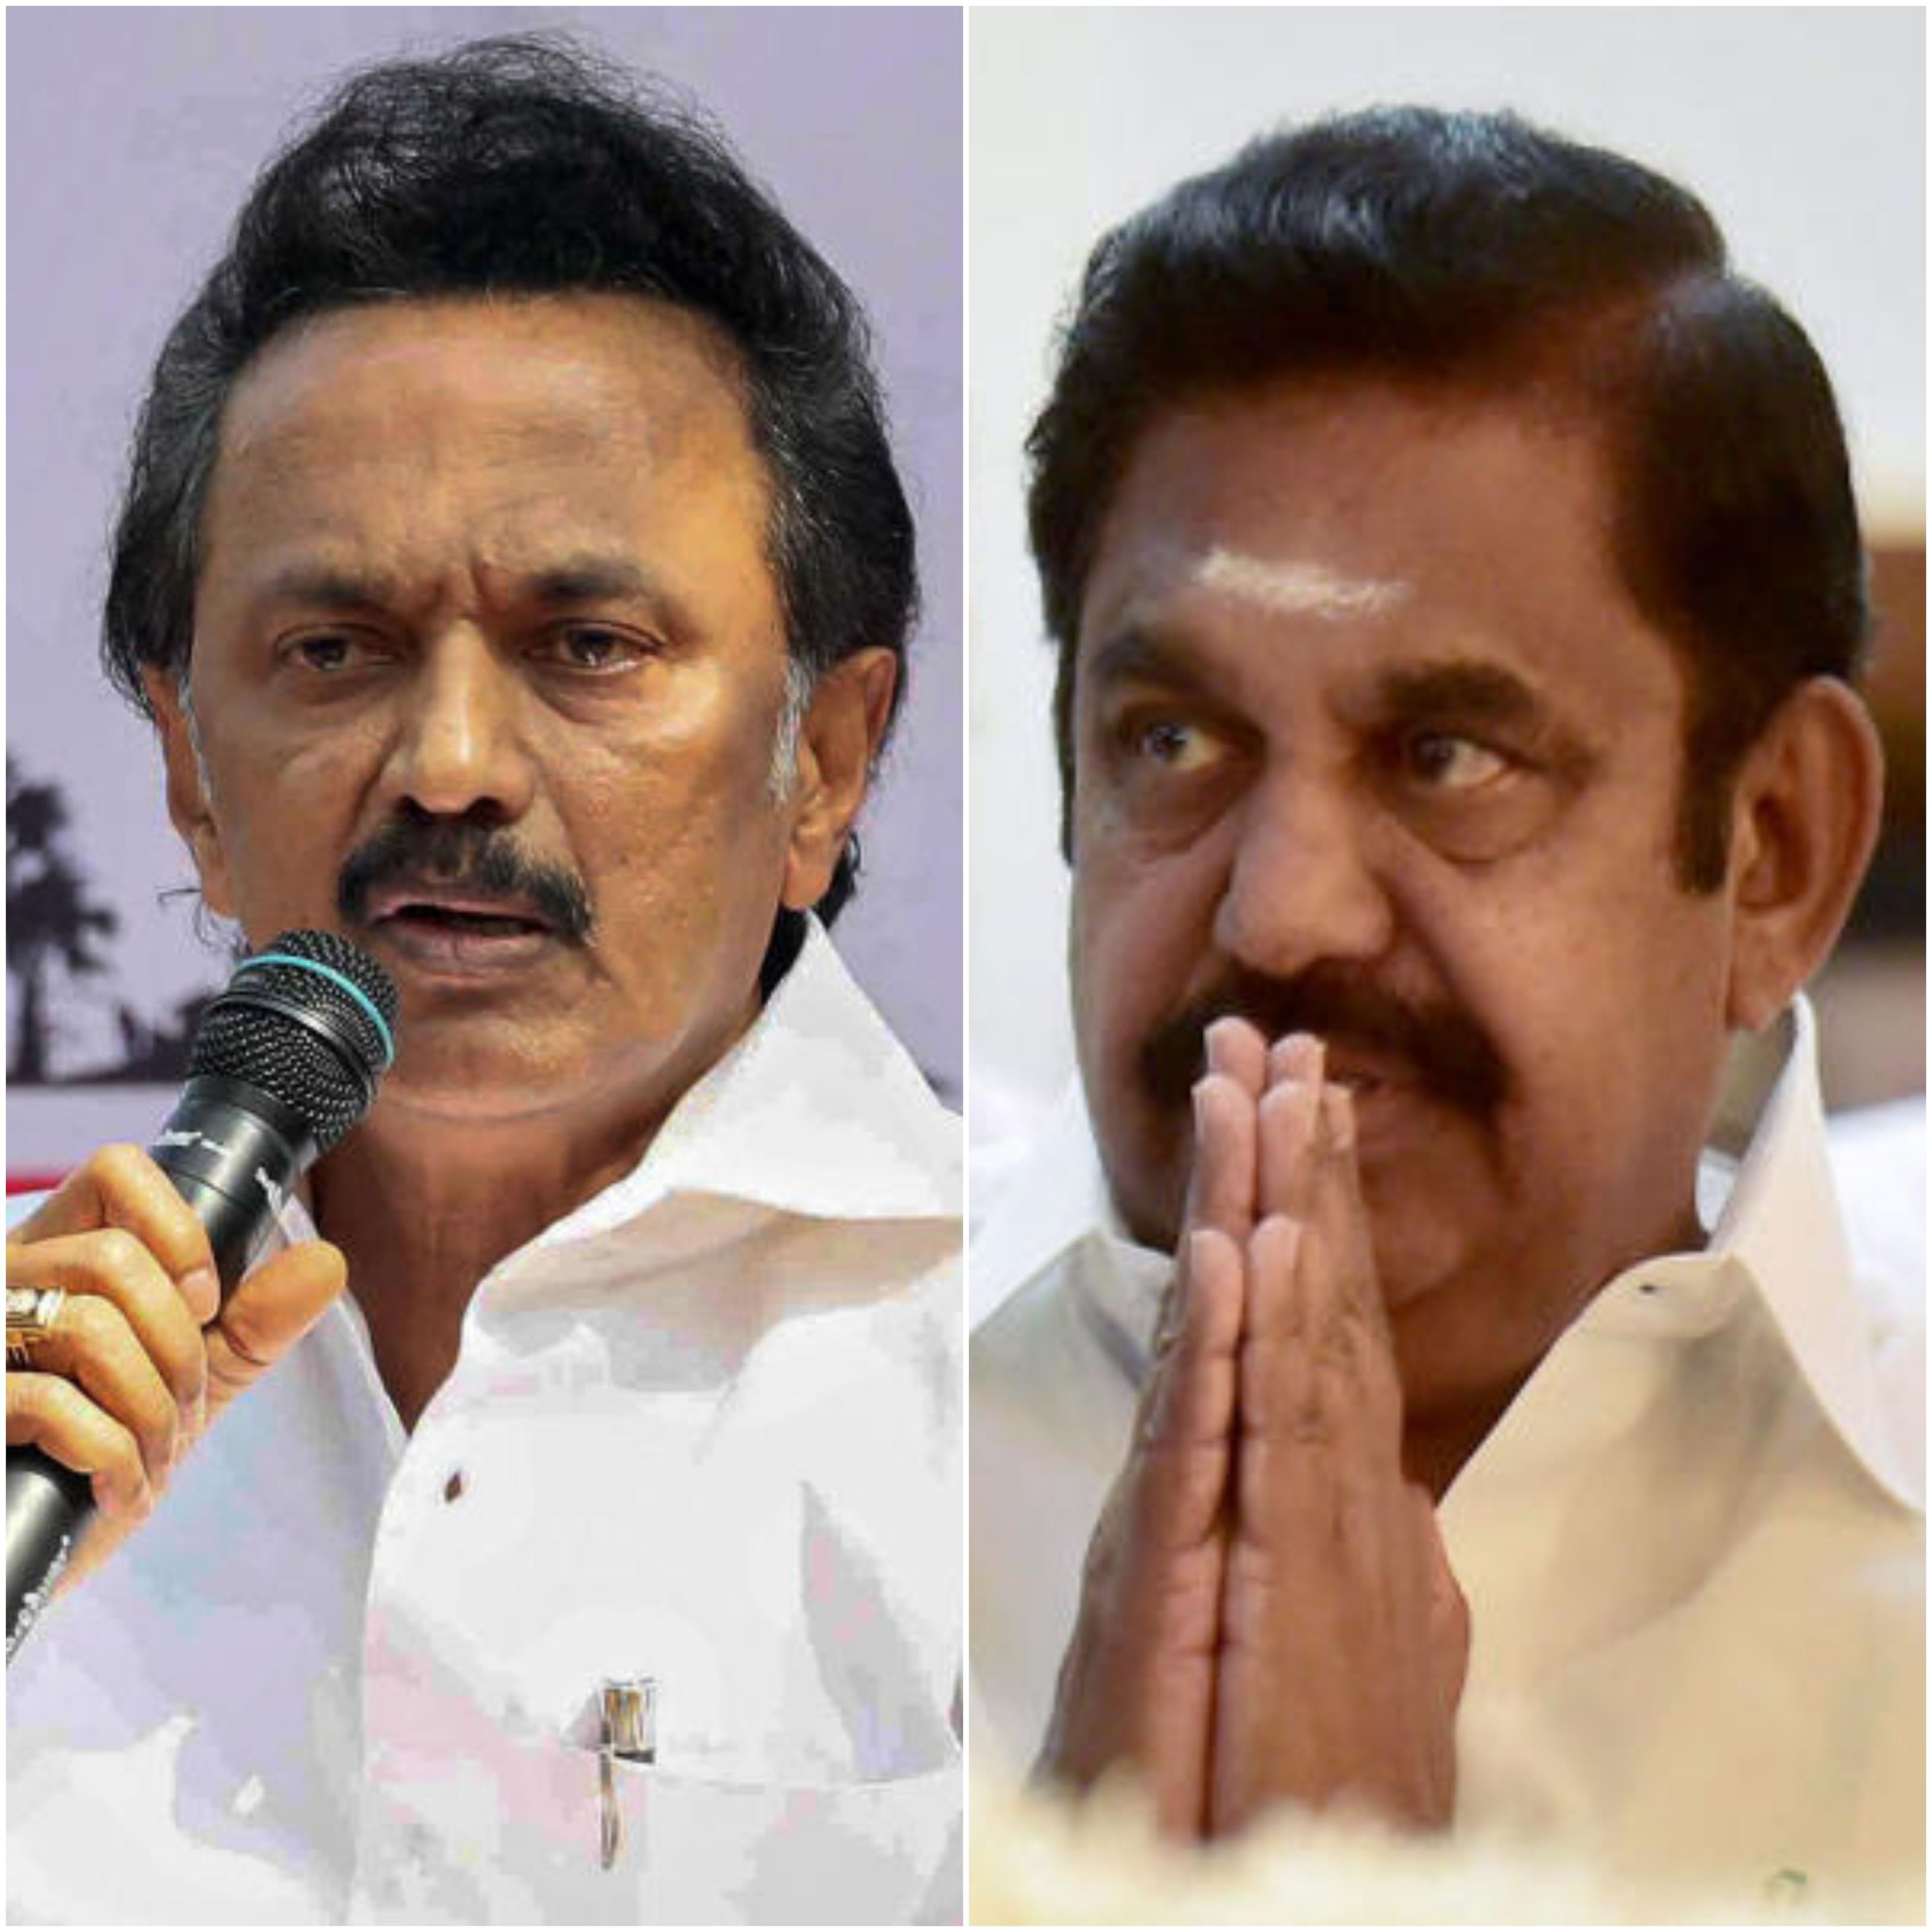 DMK President and Opposition Leader M K Stalin and Chief Minister Edappadi K Palaniswami. (PTI photos)